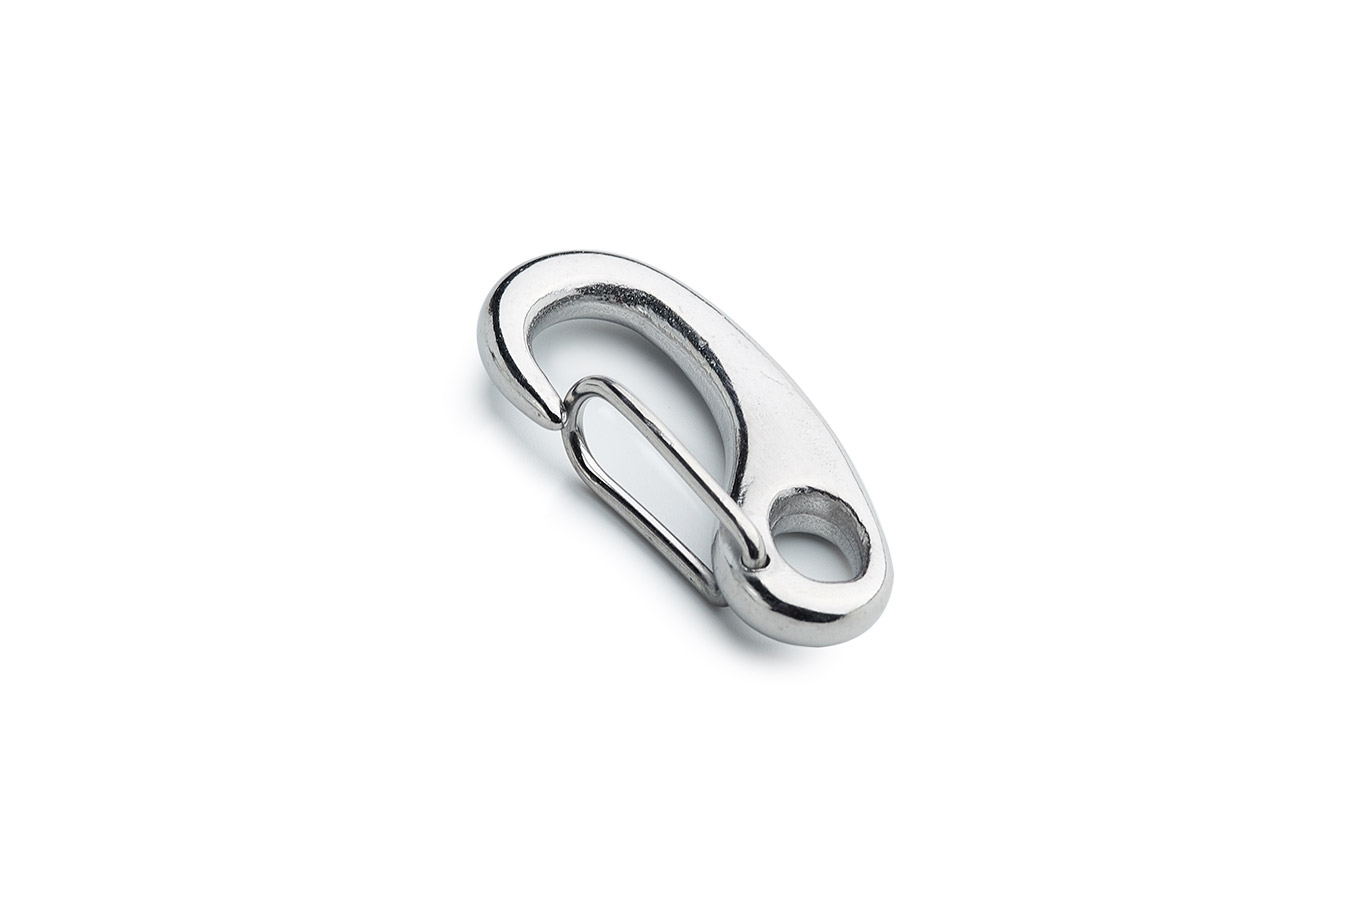 ART 8251 A4 Cast carabiner with spring latch